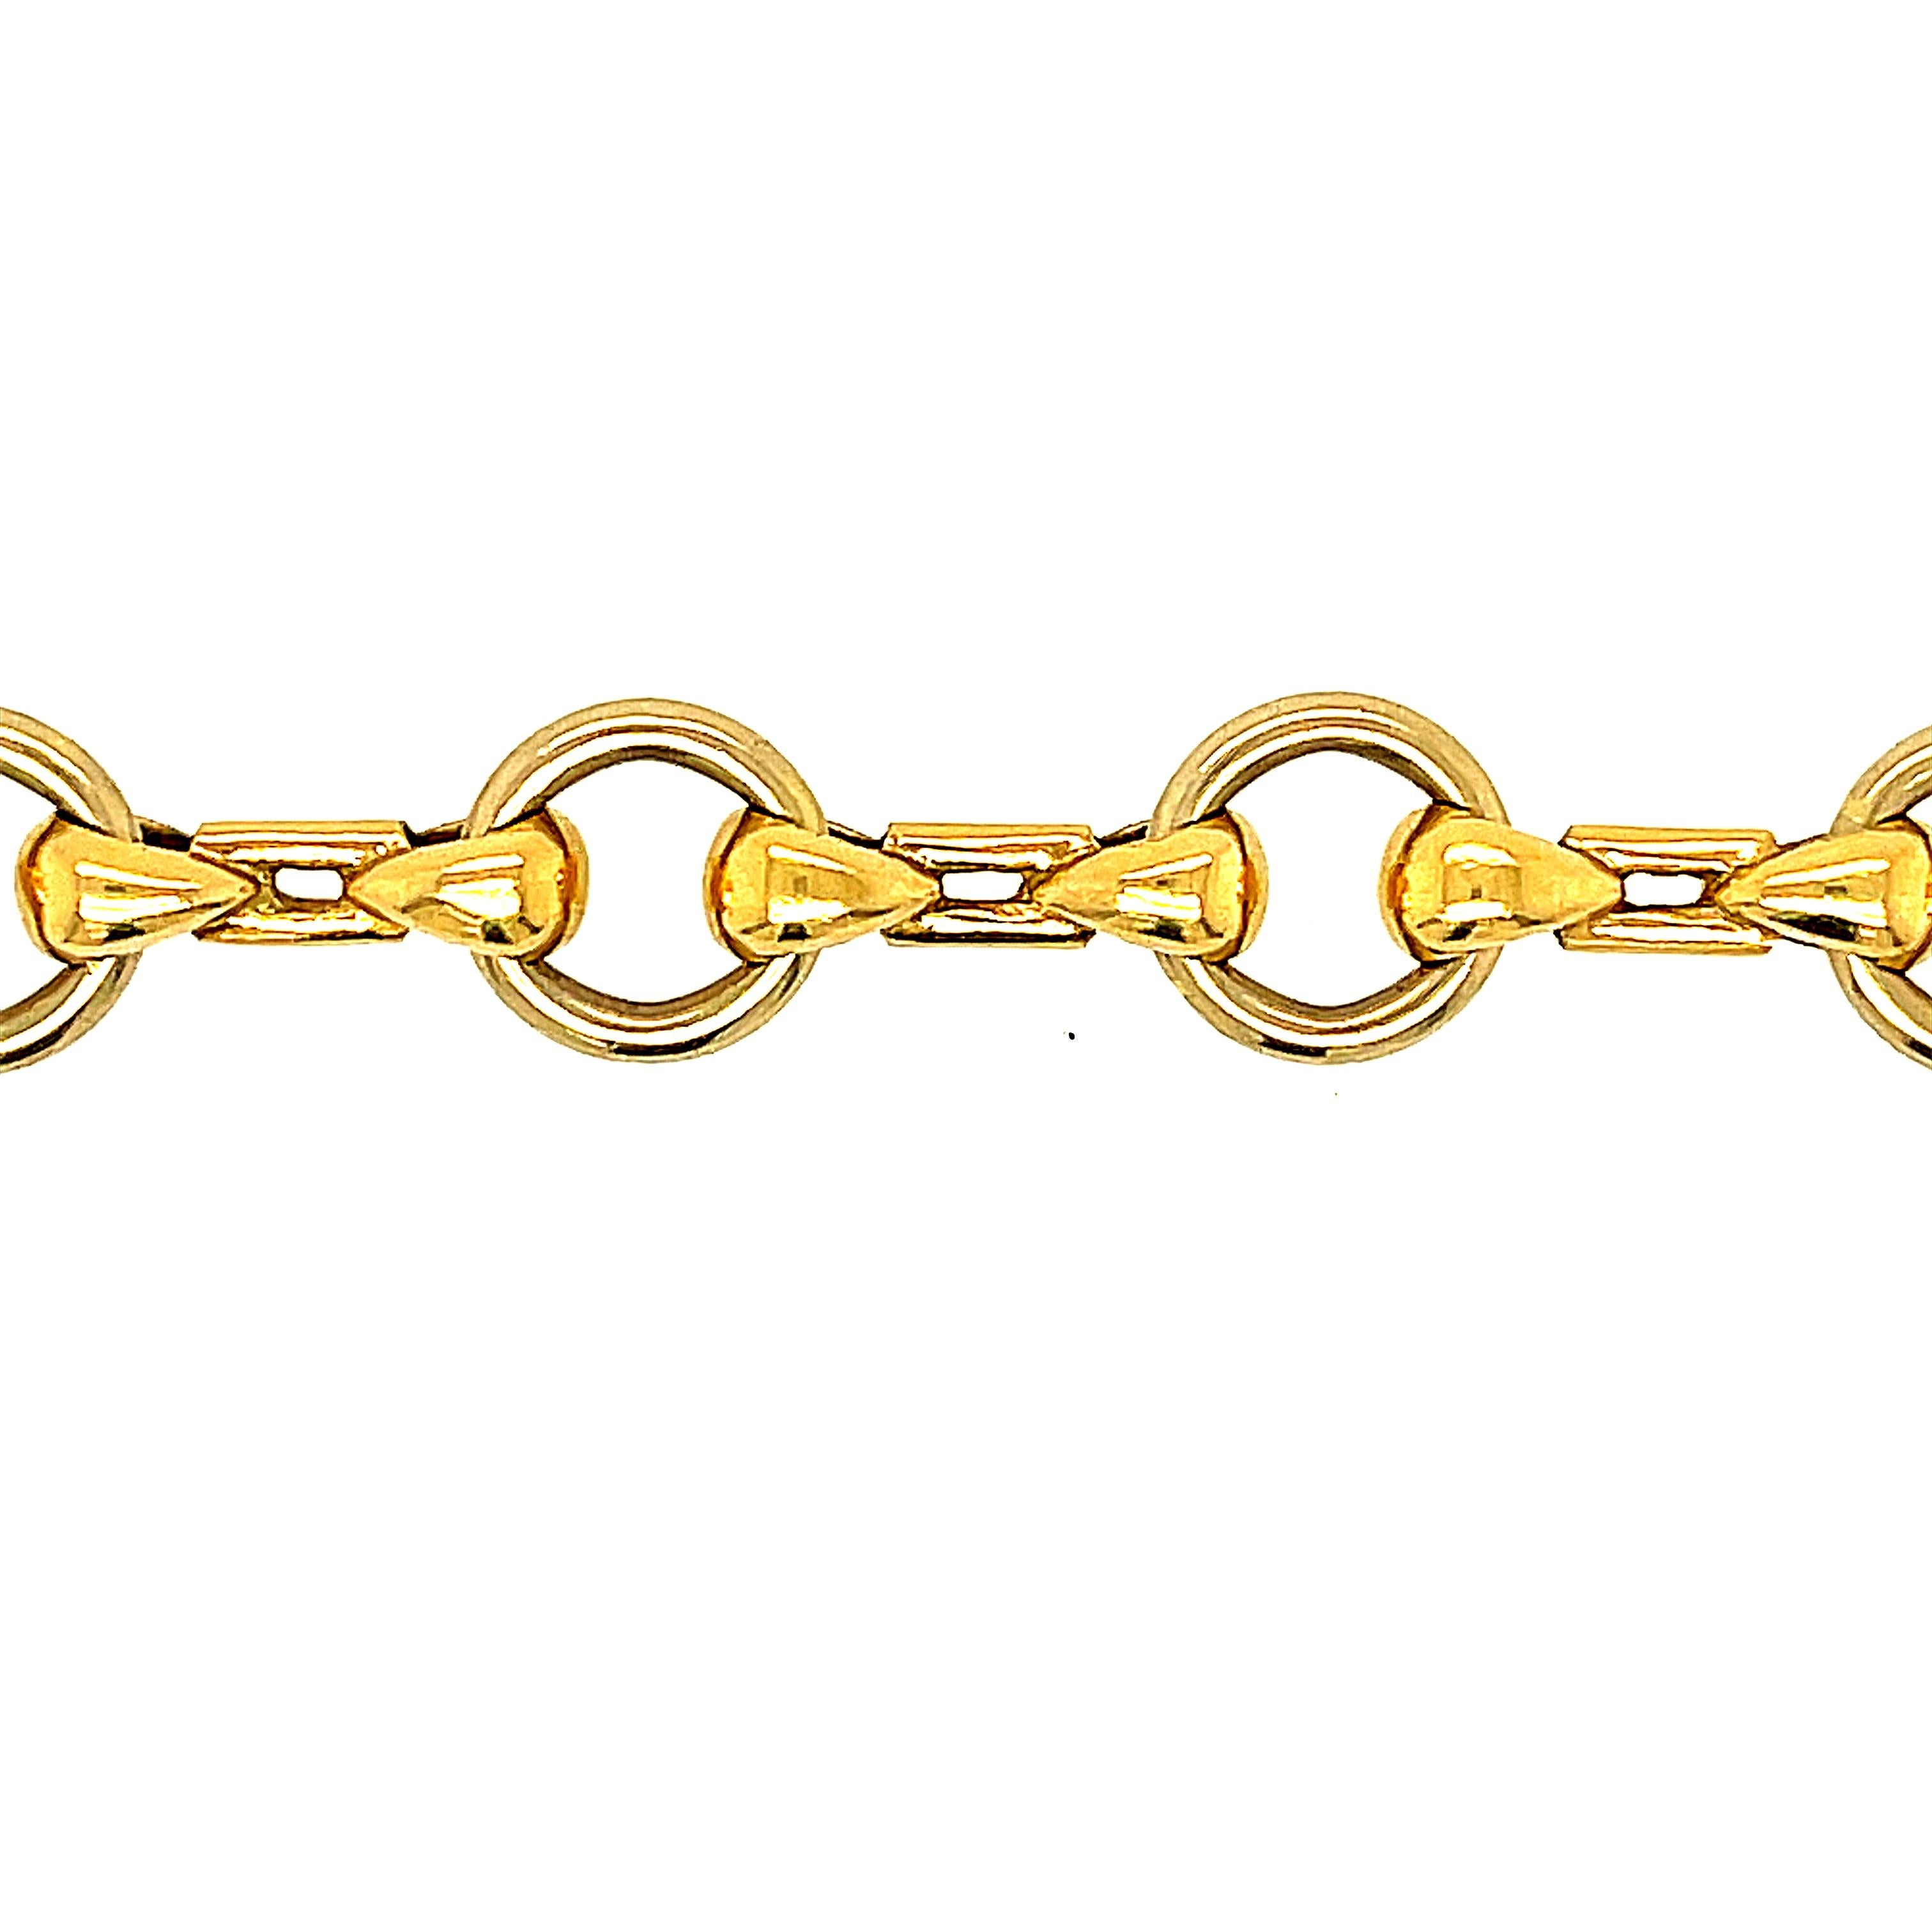 A vintage 18k yellow gold circular link bracelet by Cartier circa 1980. This easy open link is perfect for wearing everyday, layered with other bracelets or perhaps to hang a charm. It is such a versatile link. The bracelet is 7.5 inches long. It is